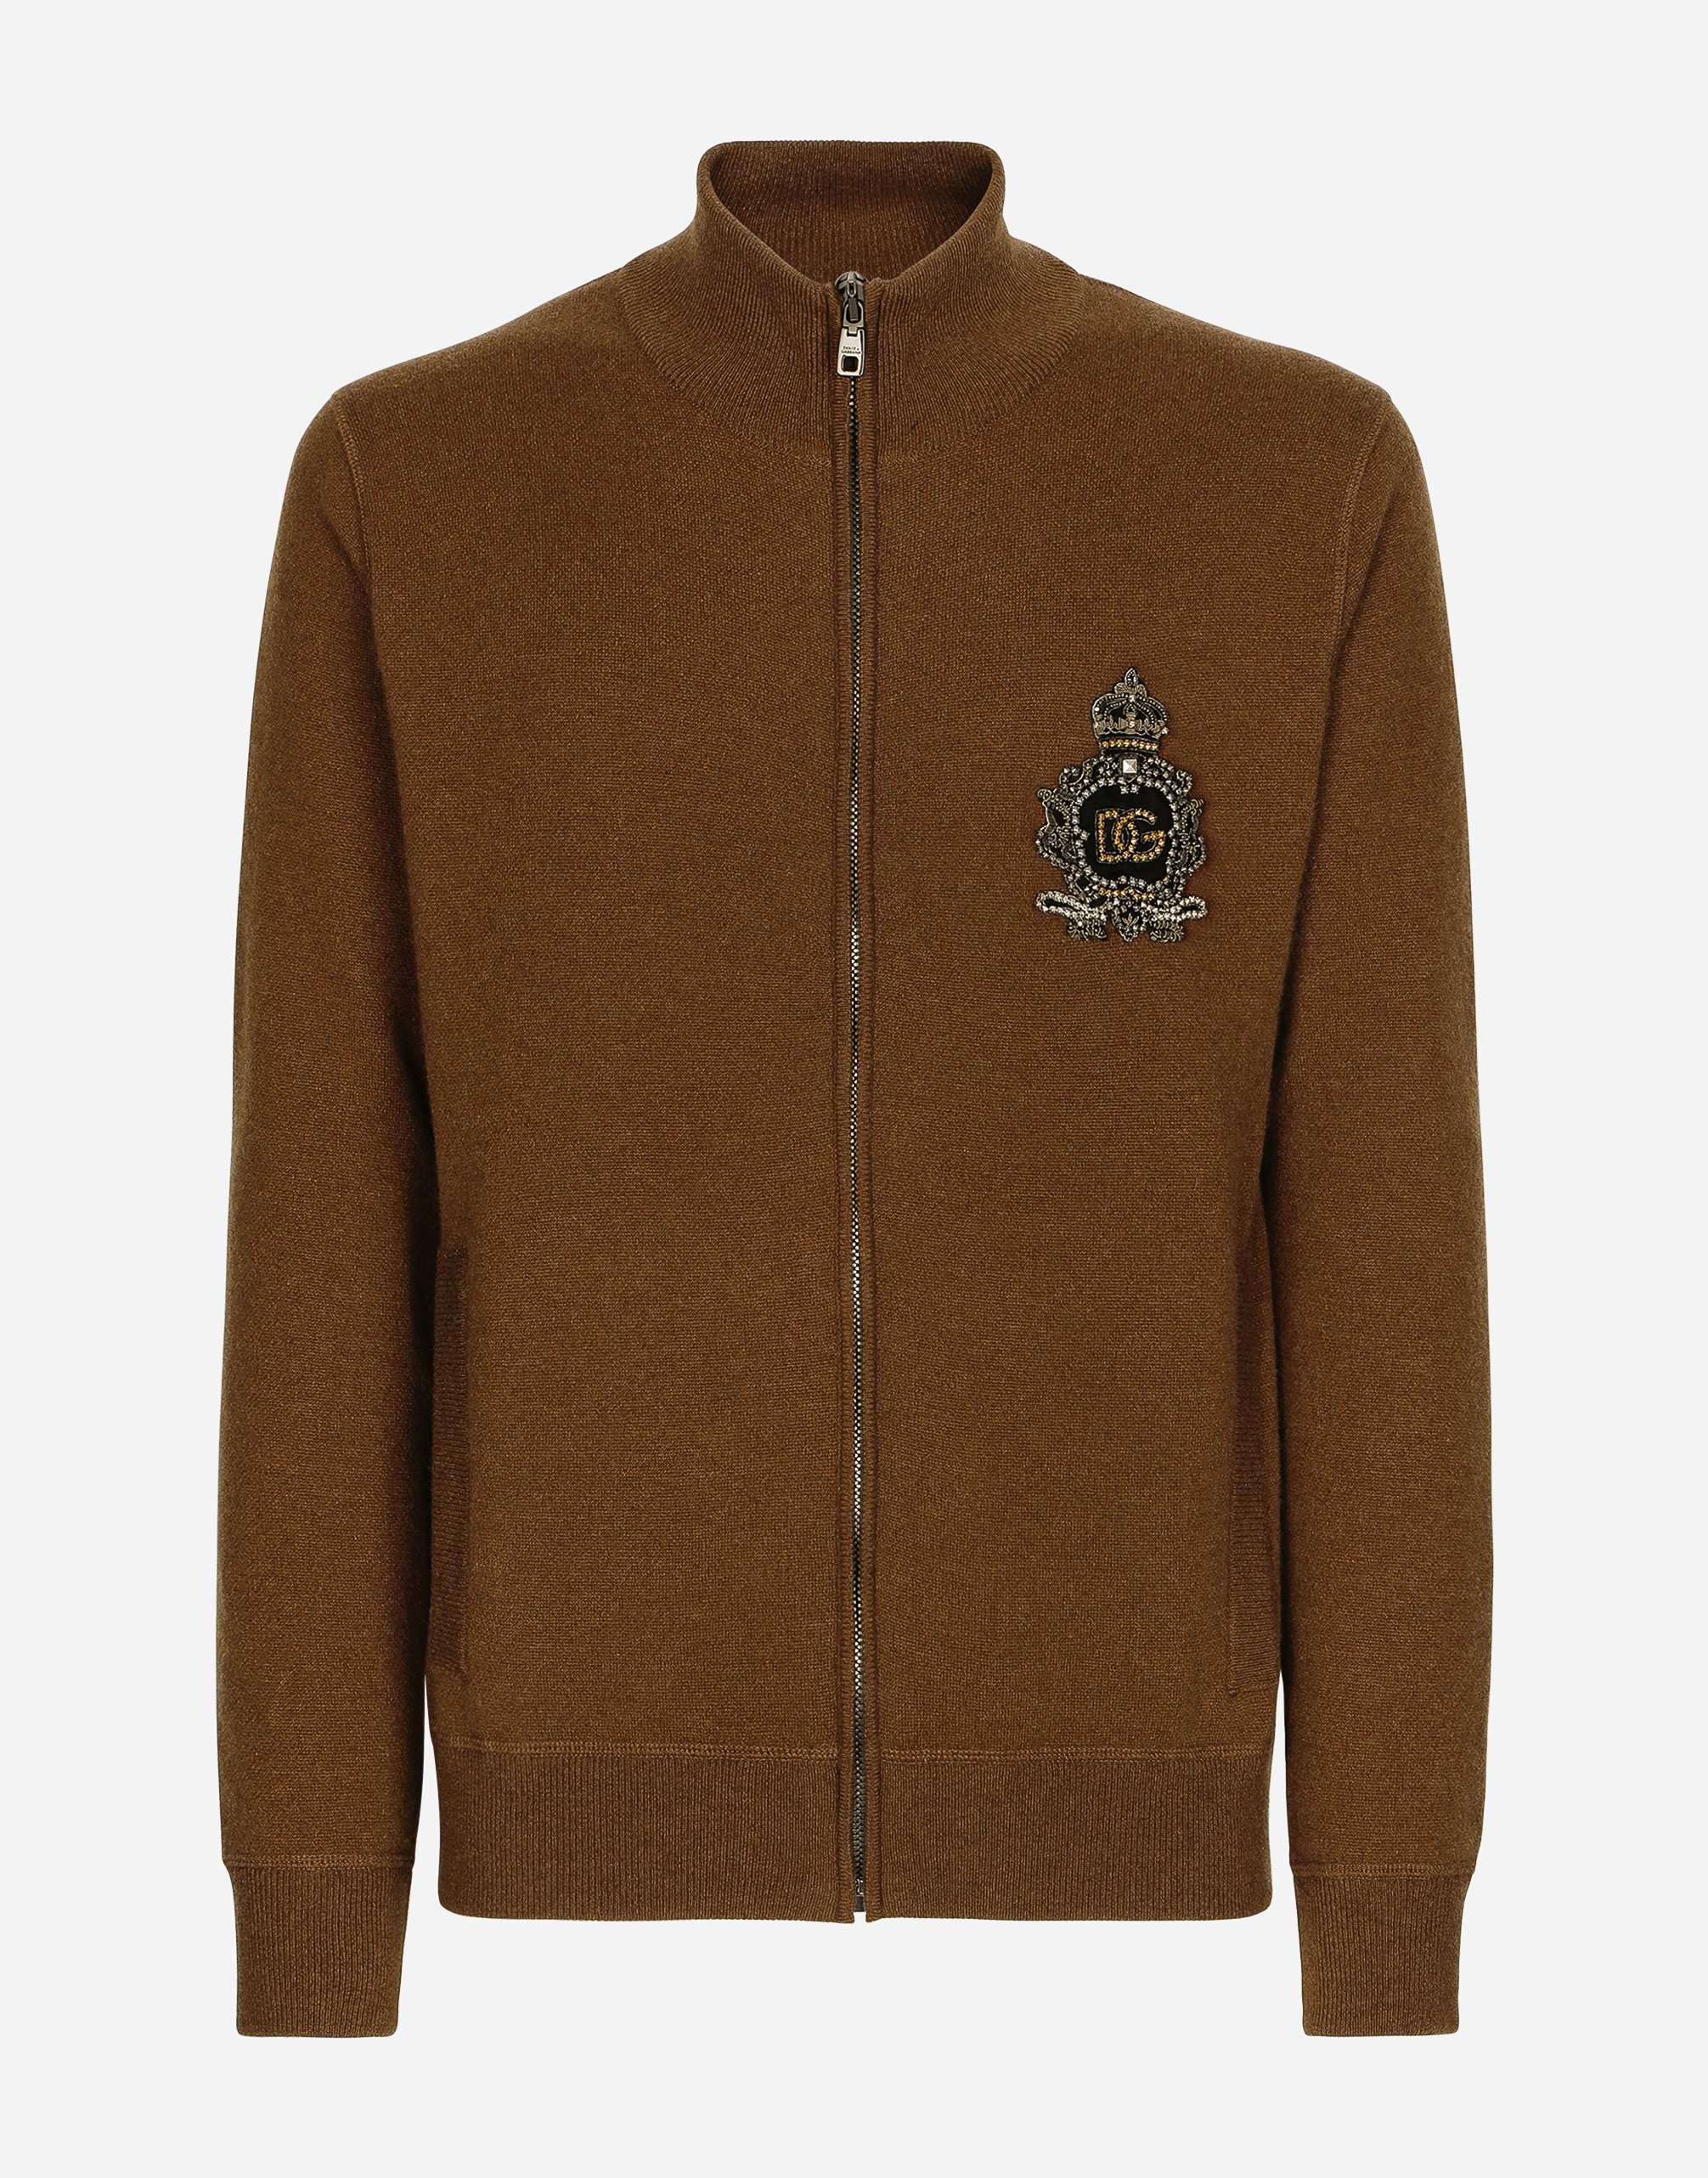 Dolce & Gabbana Wool And Cashmere Knit Zip-up Sweater With Dg Patch In Brown